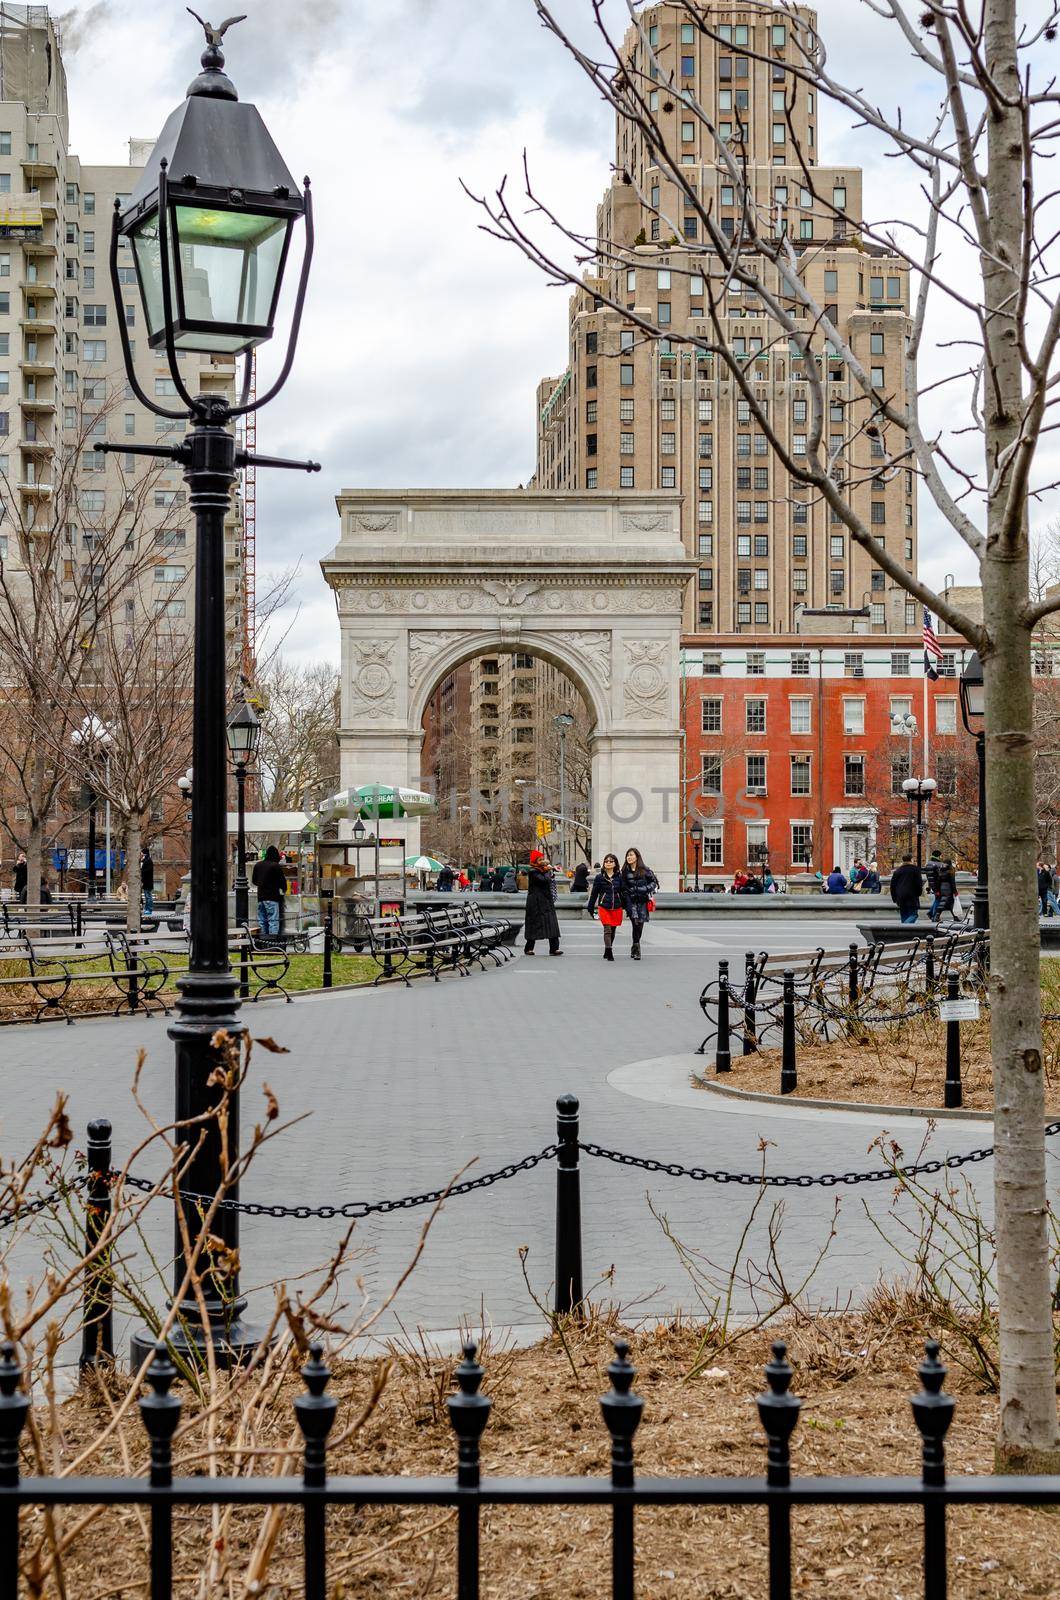 Washington Square Arch, New York City during winter with few People walking in the Park, overcast, street lamp in forefront, view from distance, vertical